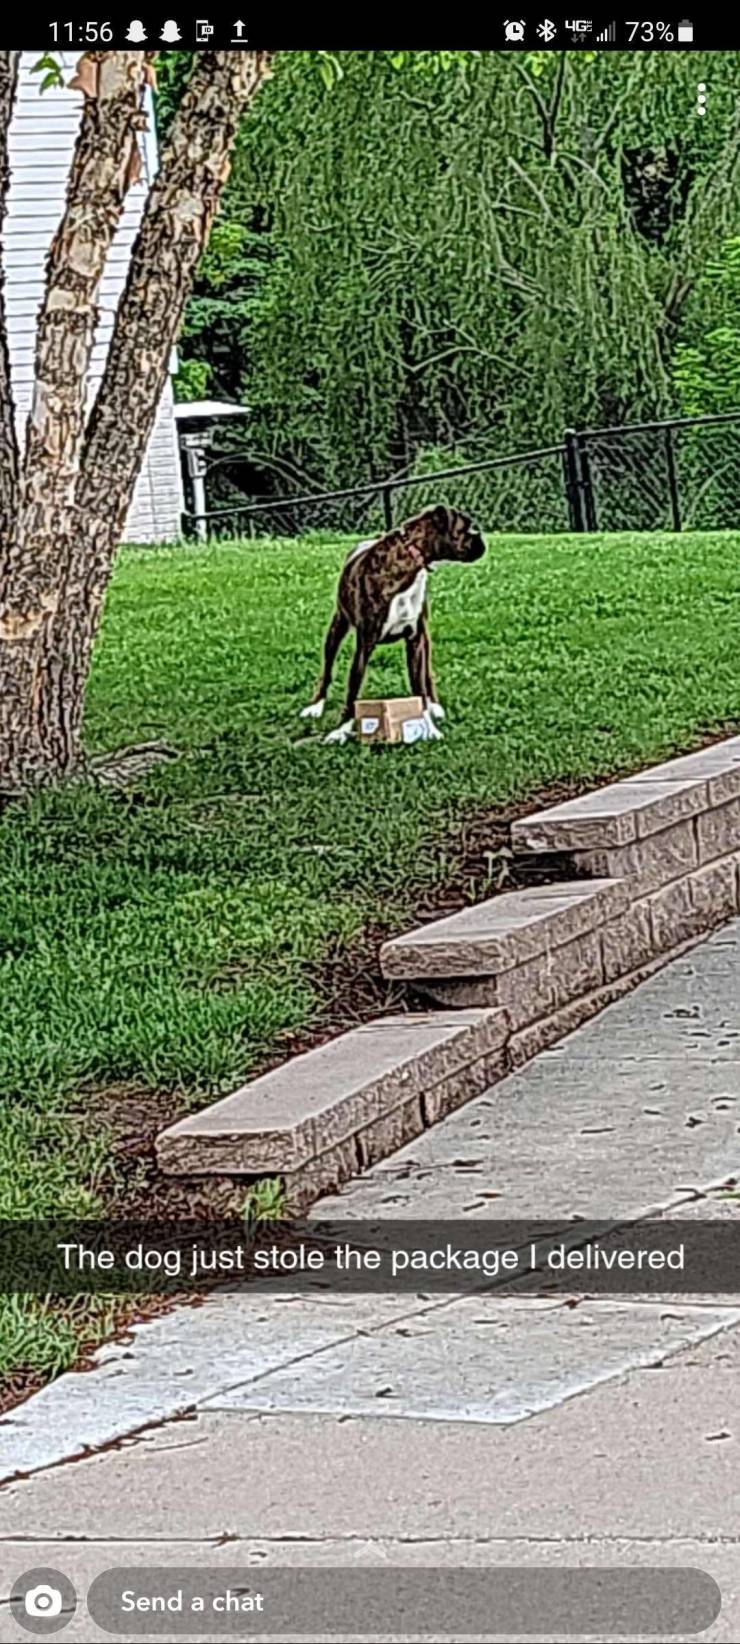 grass - Q 46.73% The dog just stole the package I delivered Send a chat